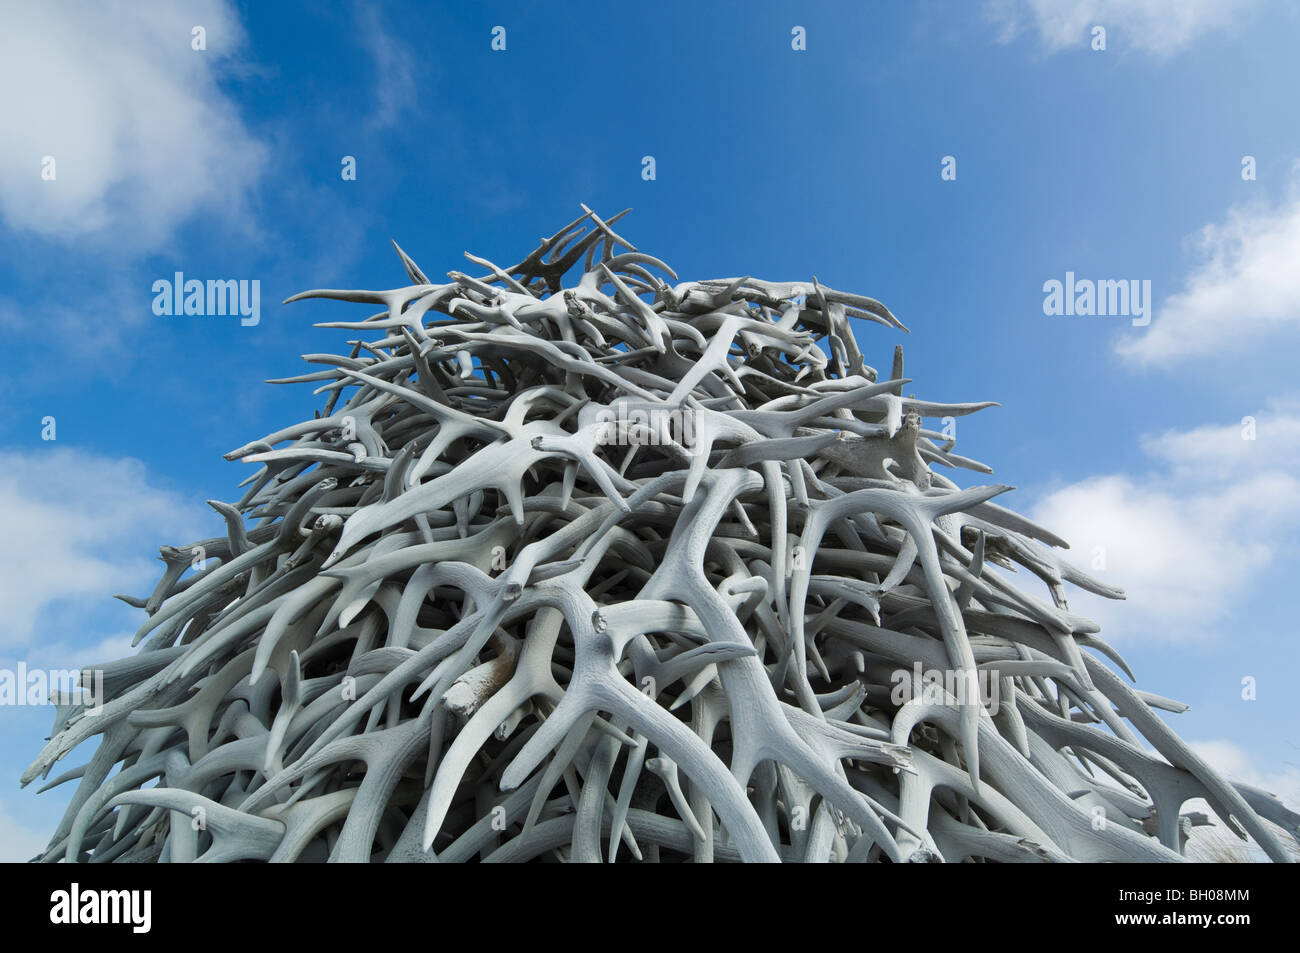 Pile of bleached elk antlers at the National Bison Range in Montana, USA Stock Photo